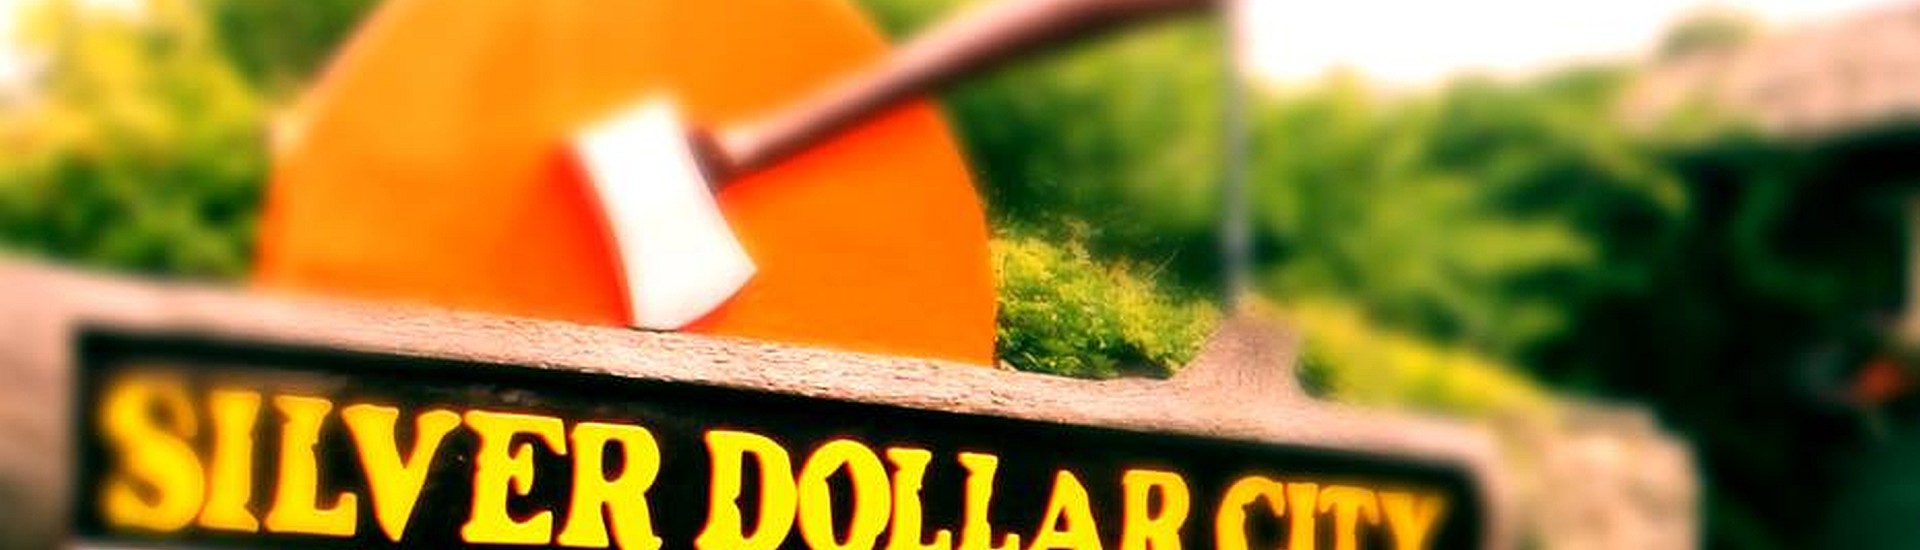 Silver Dollar City Discount Tickets, Coupons, & Deals ...